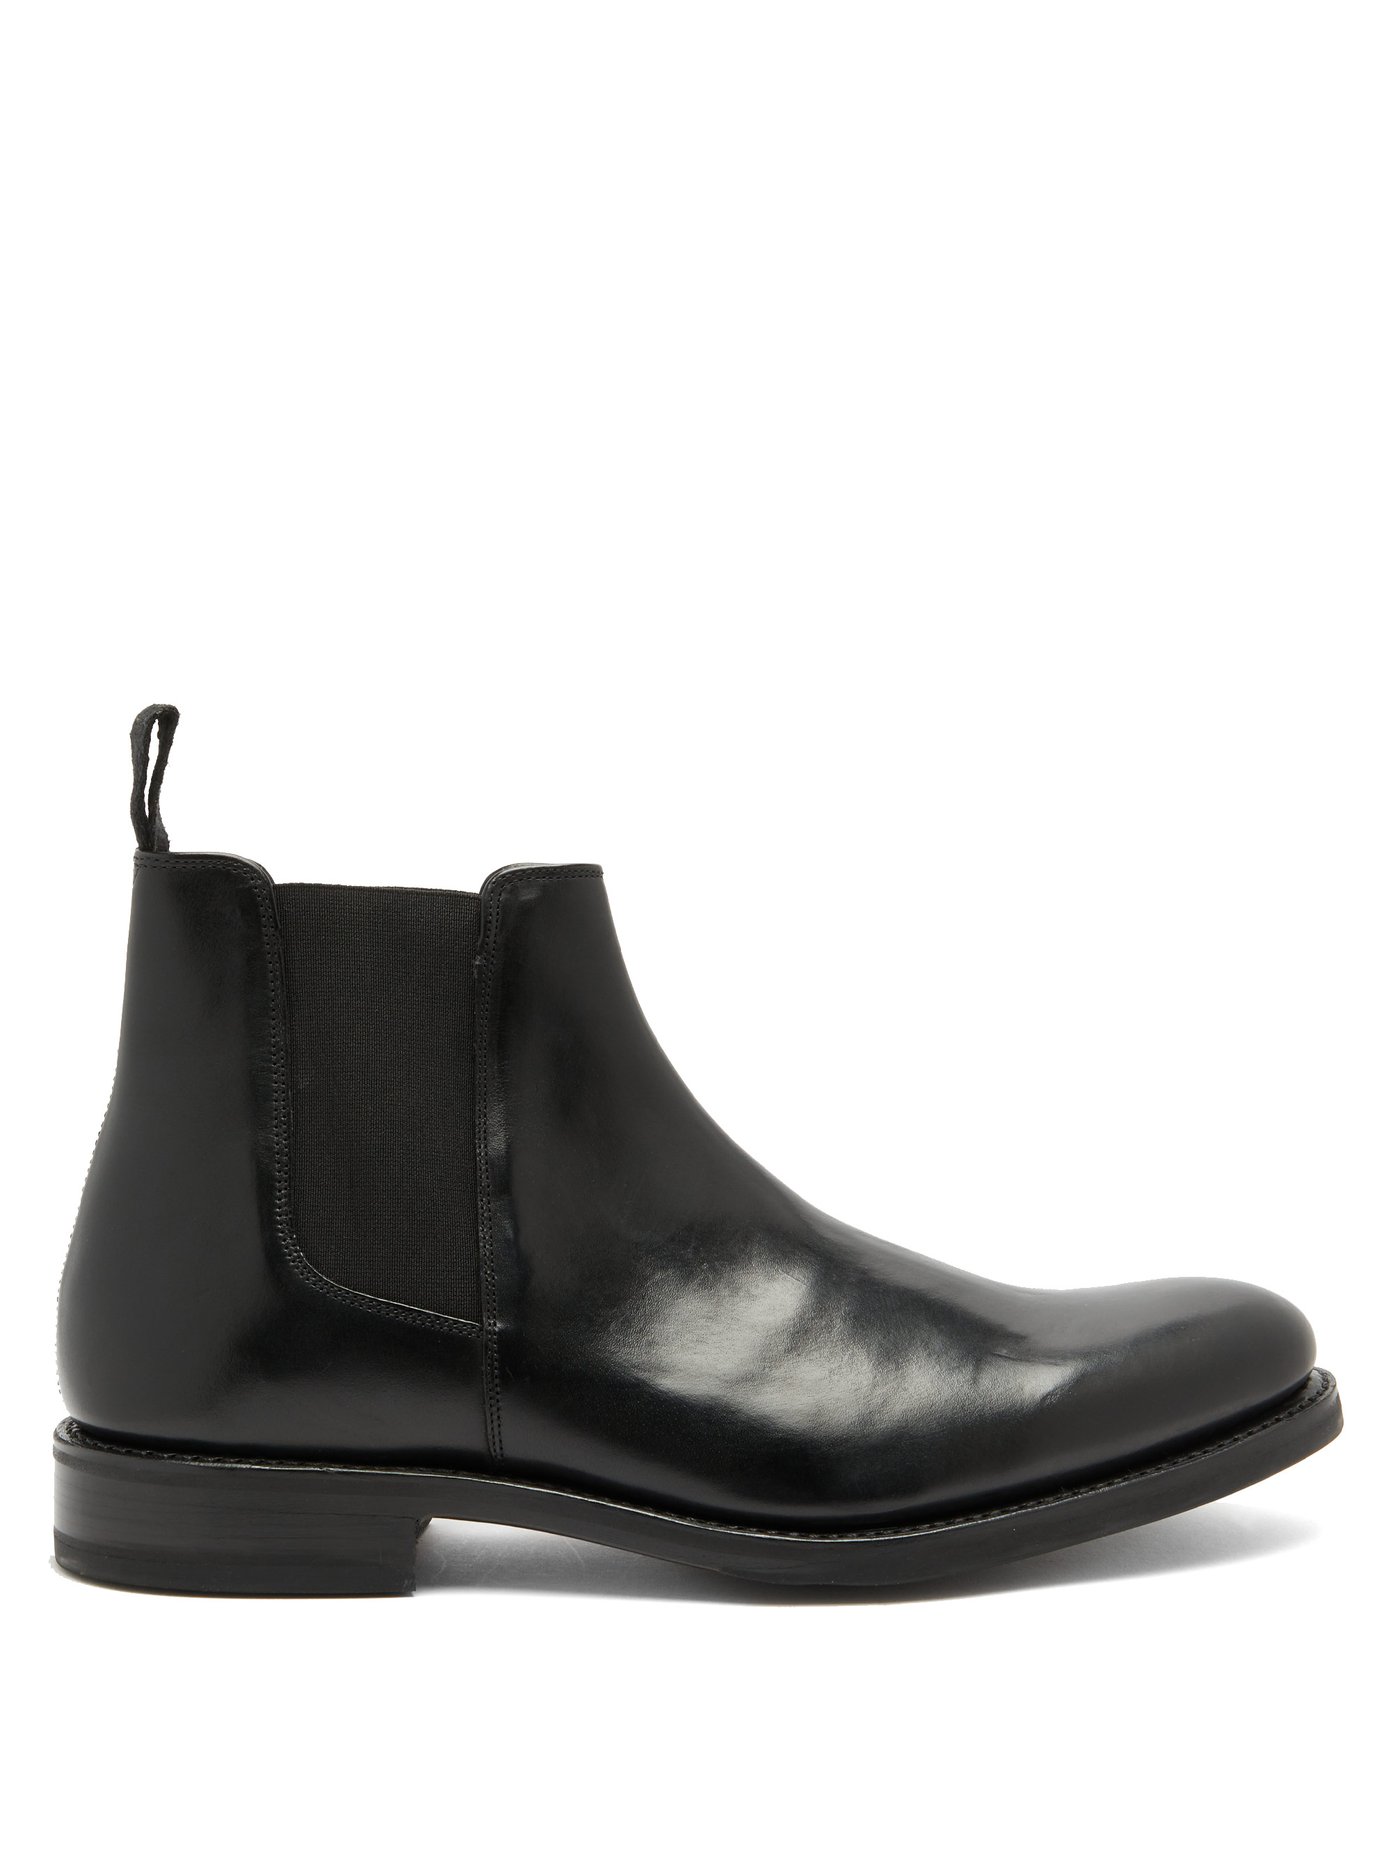 Declan leather Chelsea boots | Grenson 